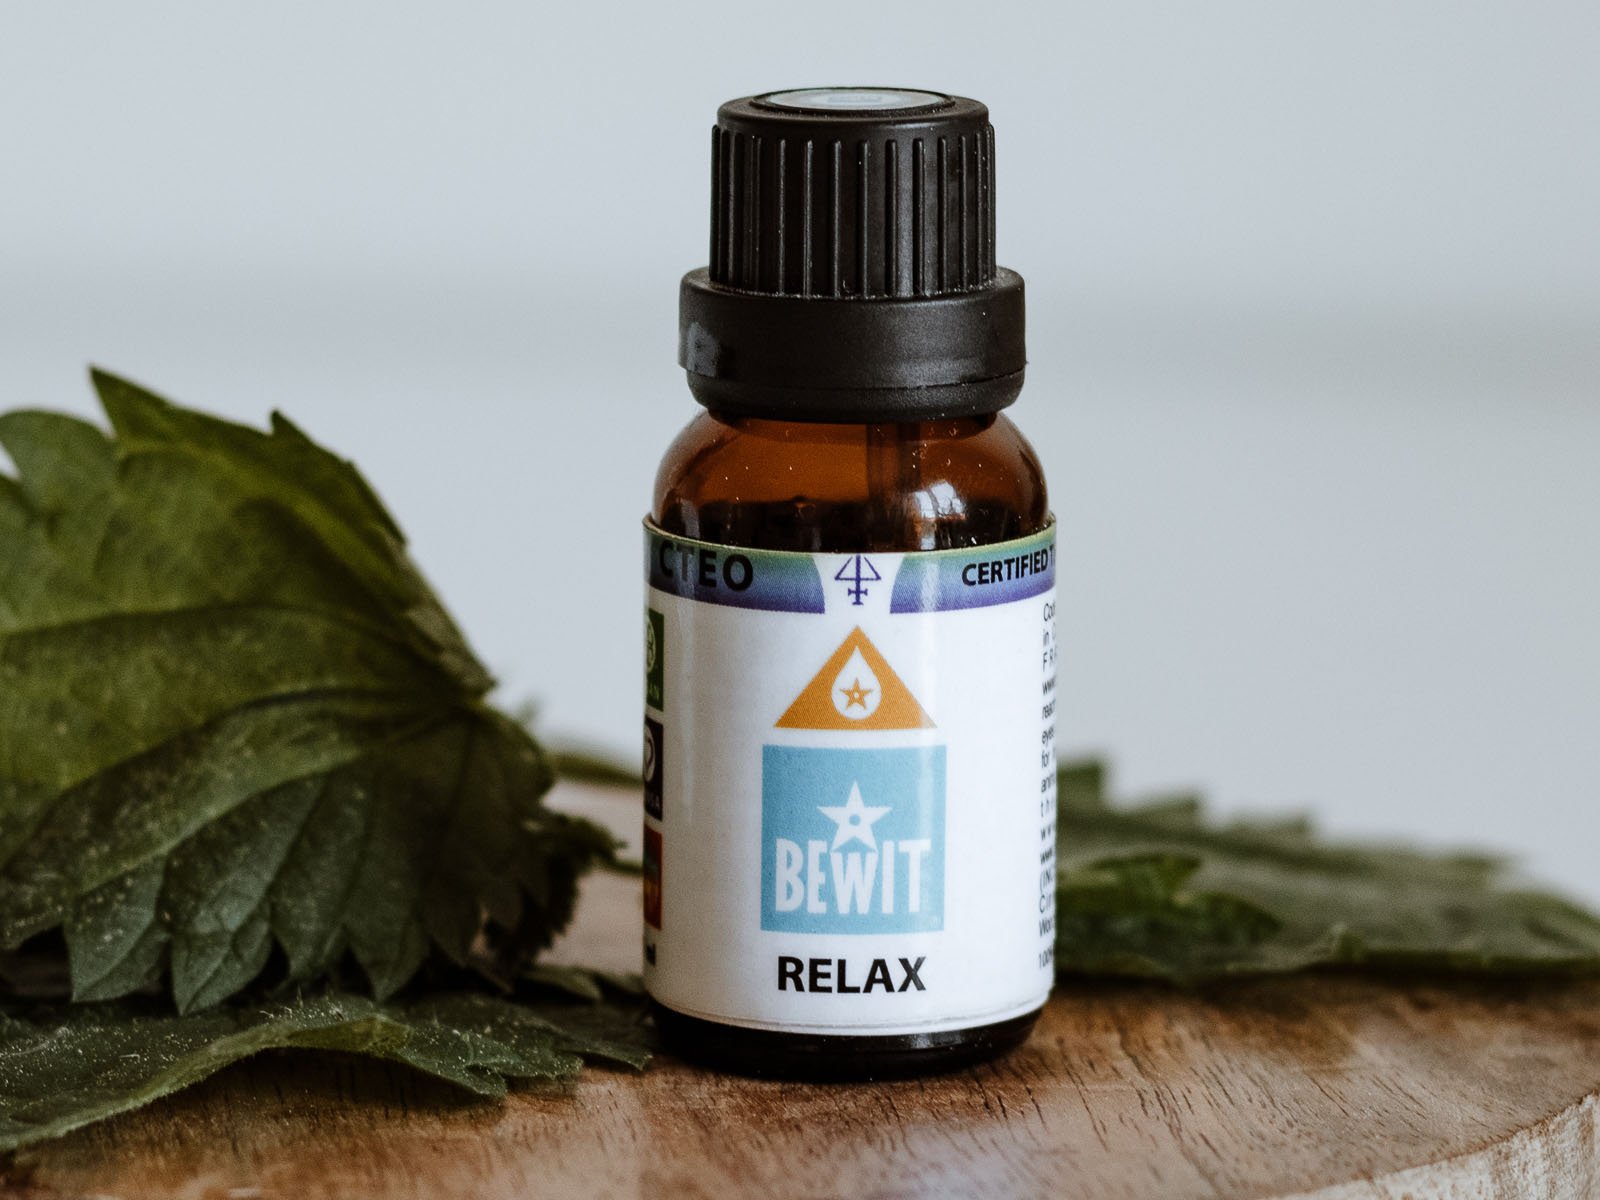 BEWIT RELAX - Blend of essential oils - 5